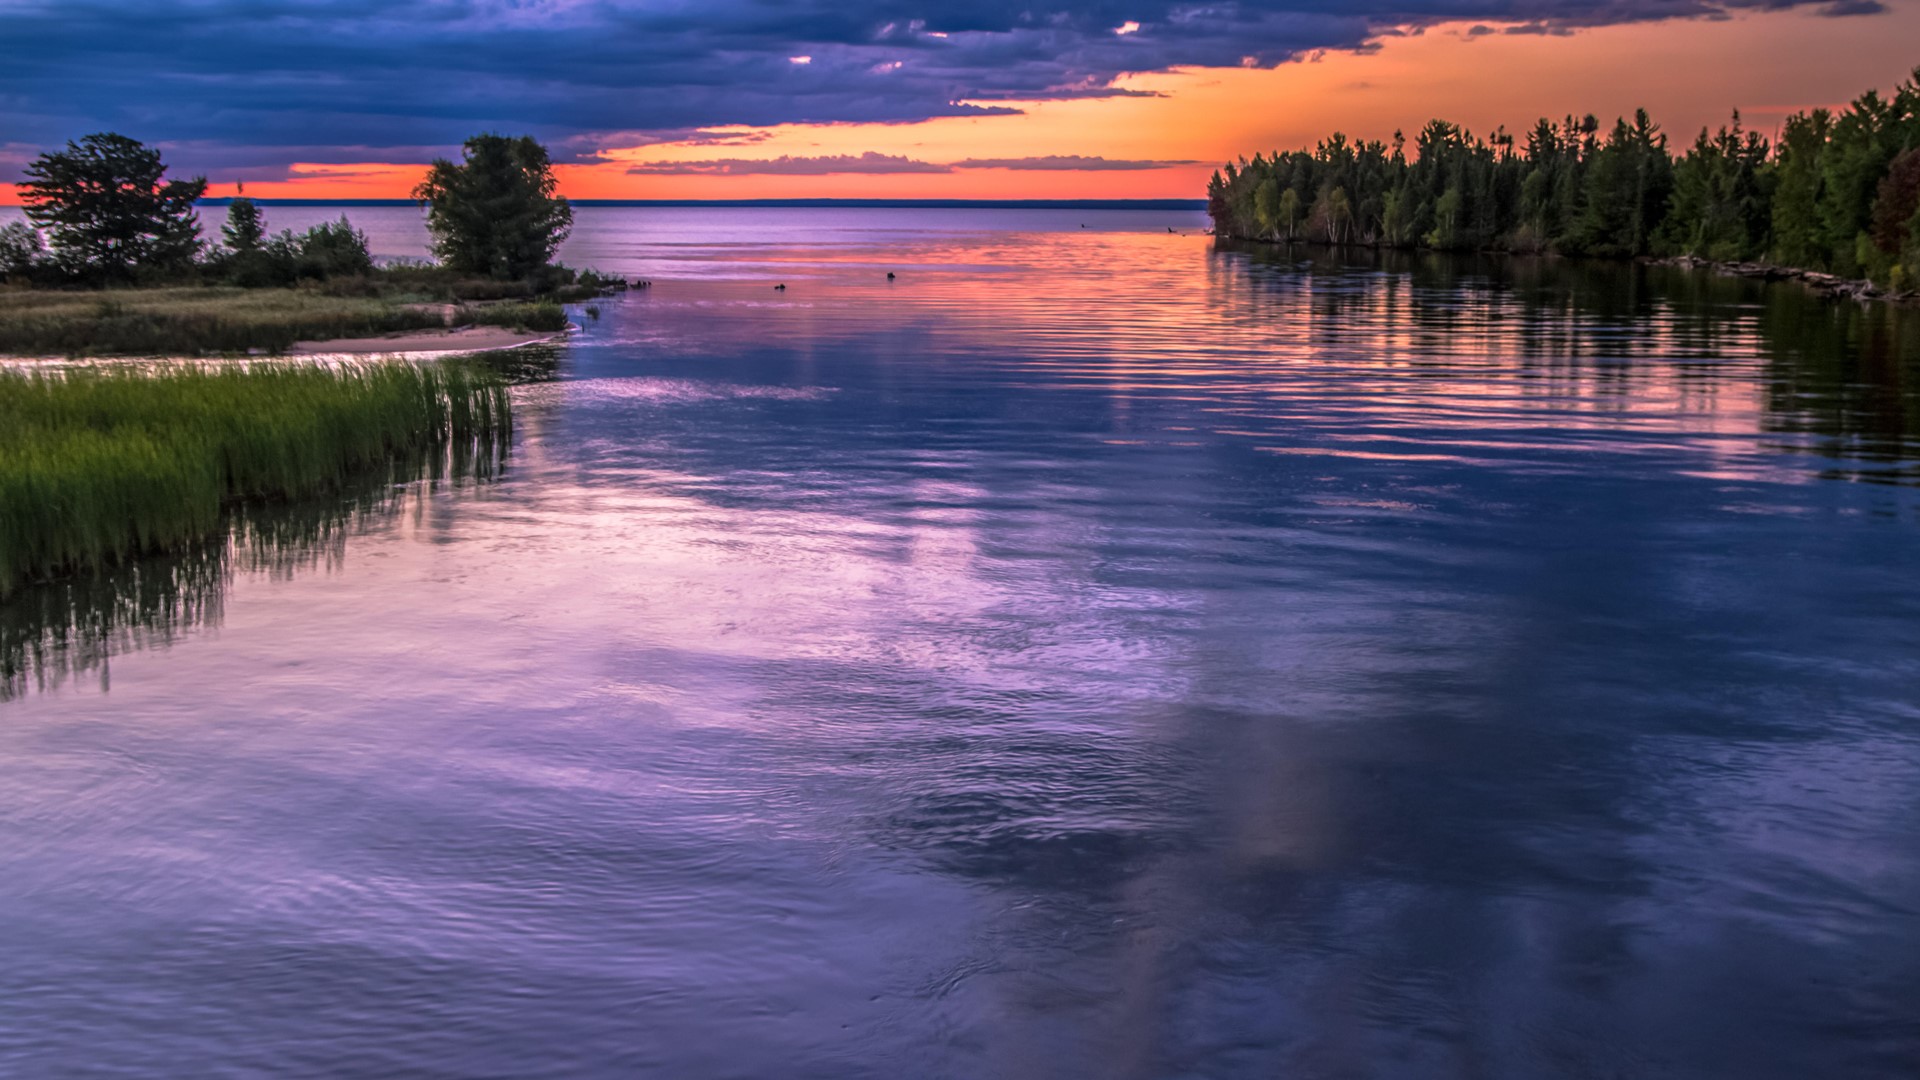 General 1920x1080 nature landscape plants trees water clouds sky sunset lake Lake Superior Michigan USA